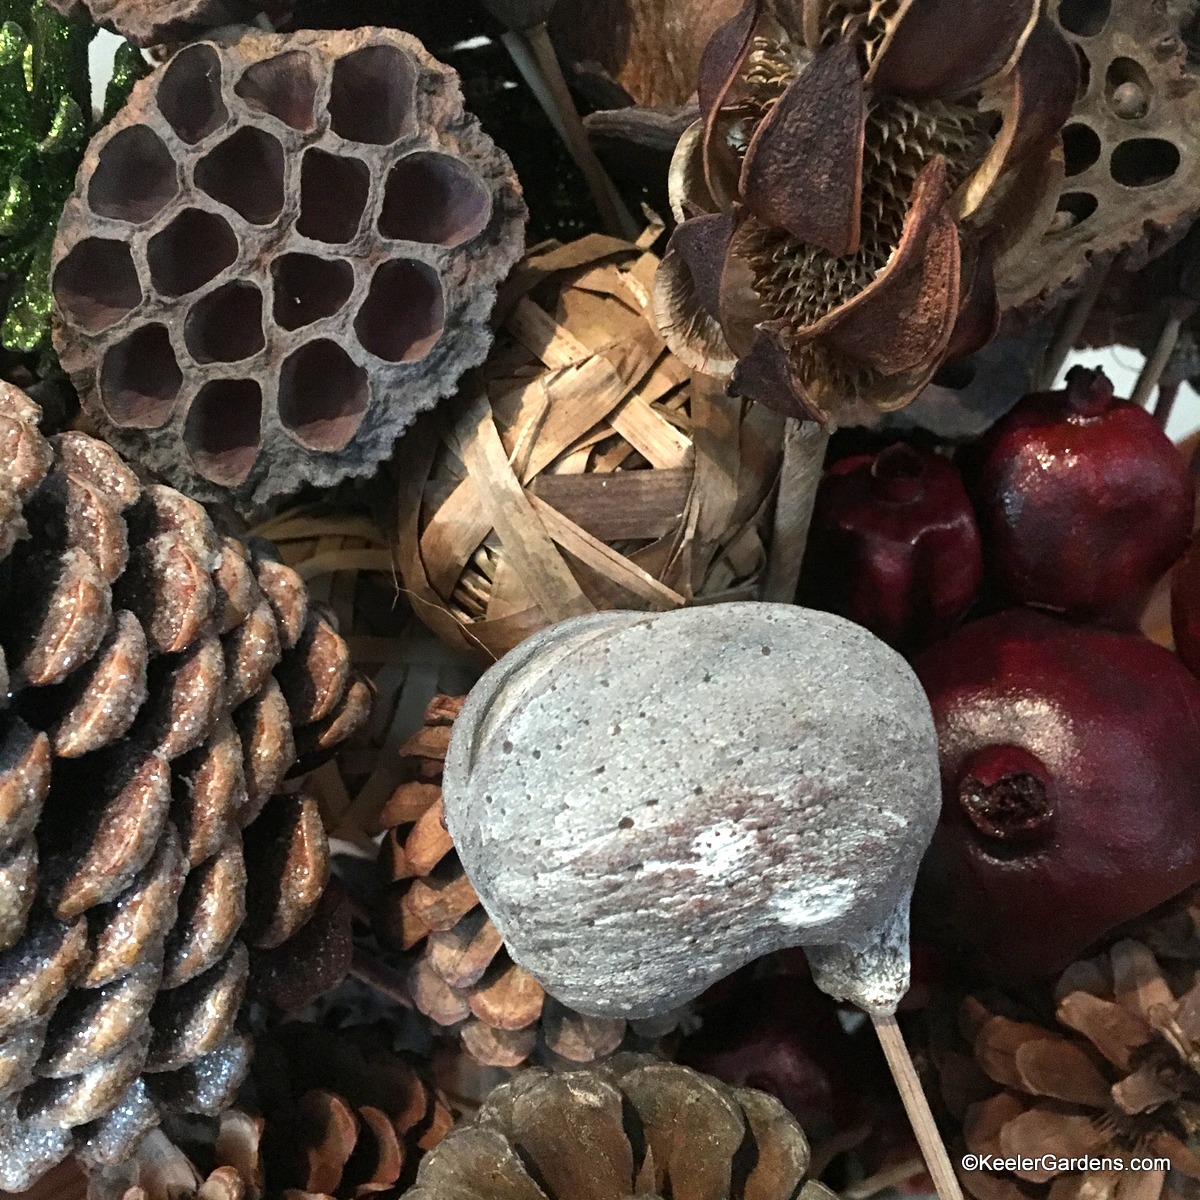 A multitude of accents are presented for a natural display including dried lotus flower seed pods, pine cones, and faux pomegranate.